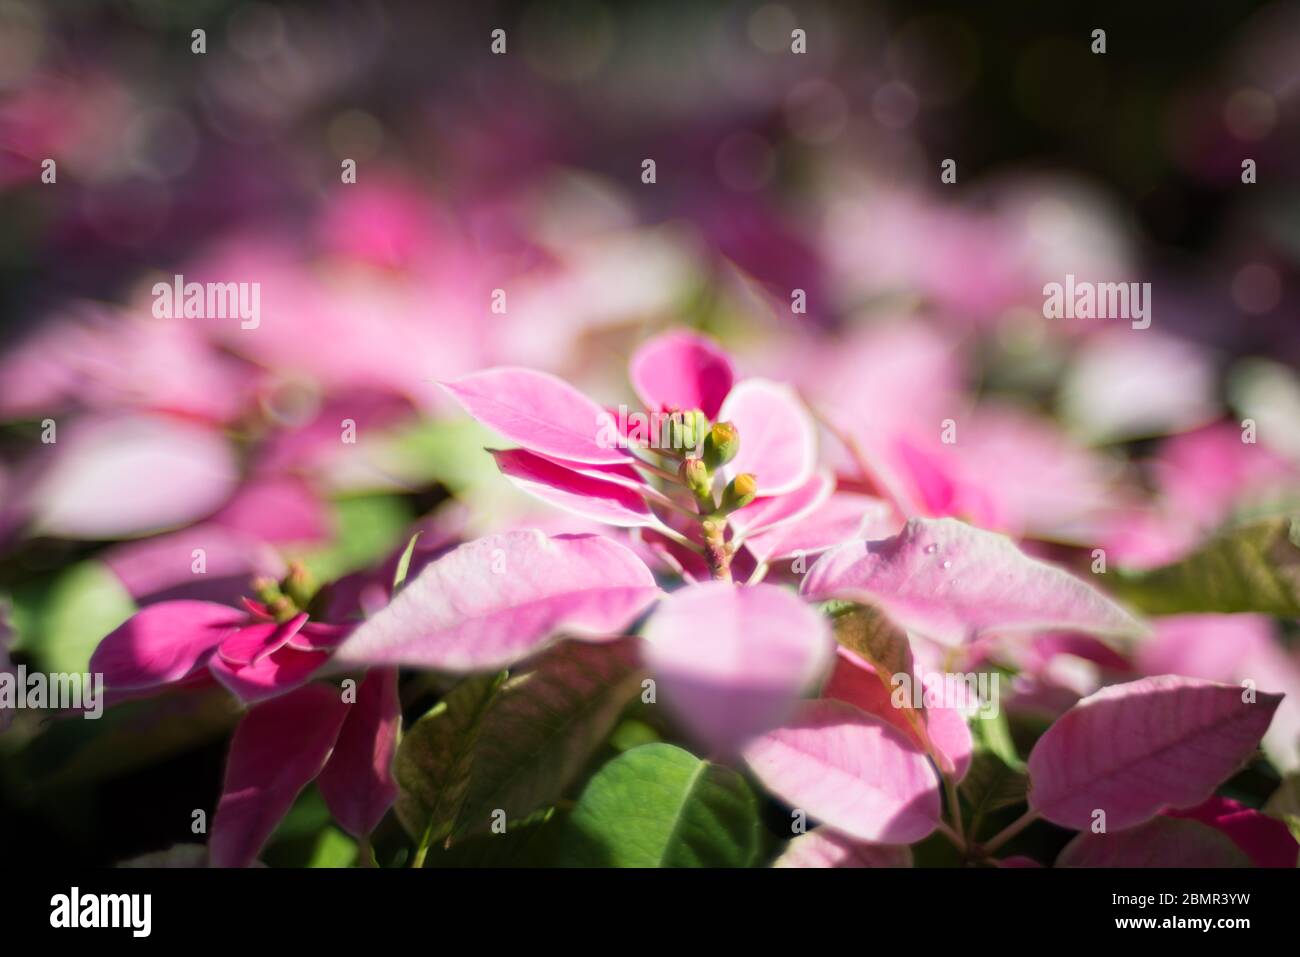 Colorful foliage nature background in pink and green tones. Floral nature background of Alternanthera Ficoidea or red threads plant leaves Stock Photo